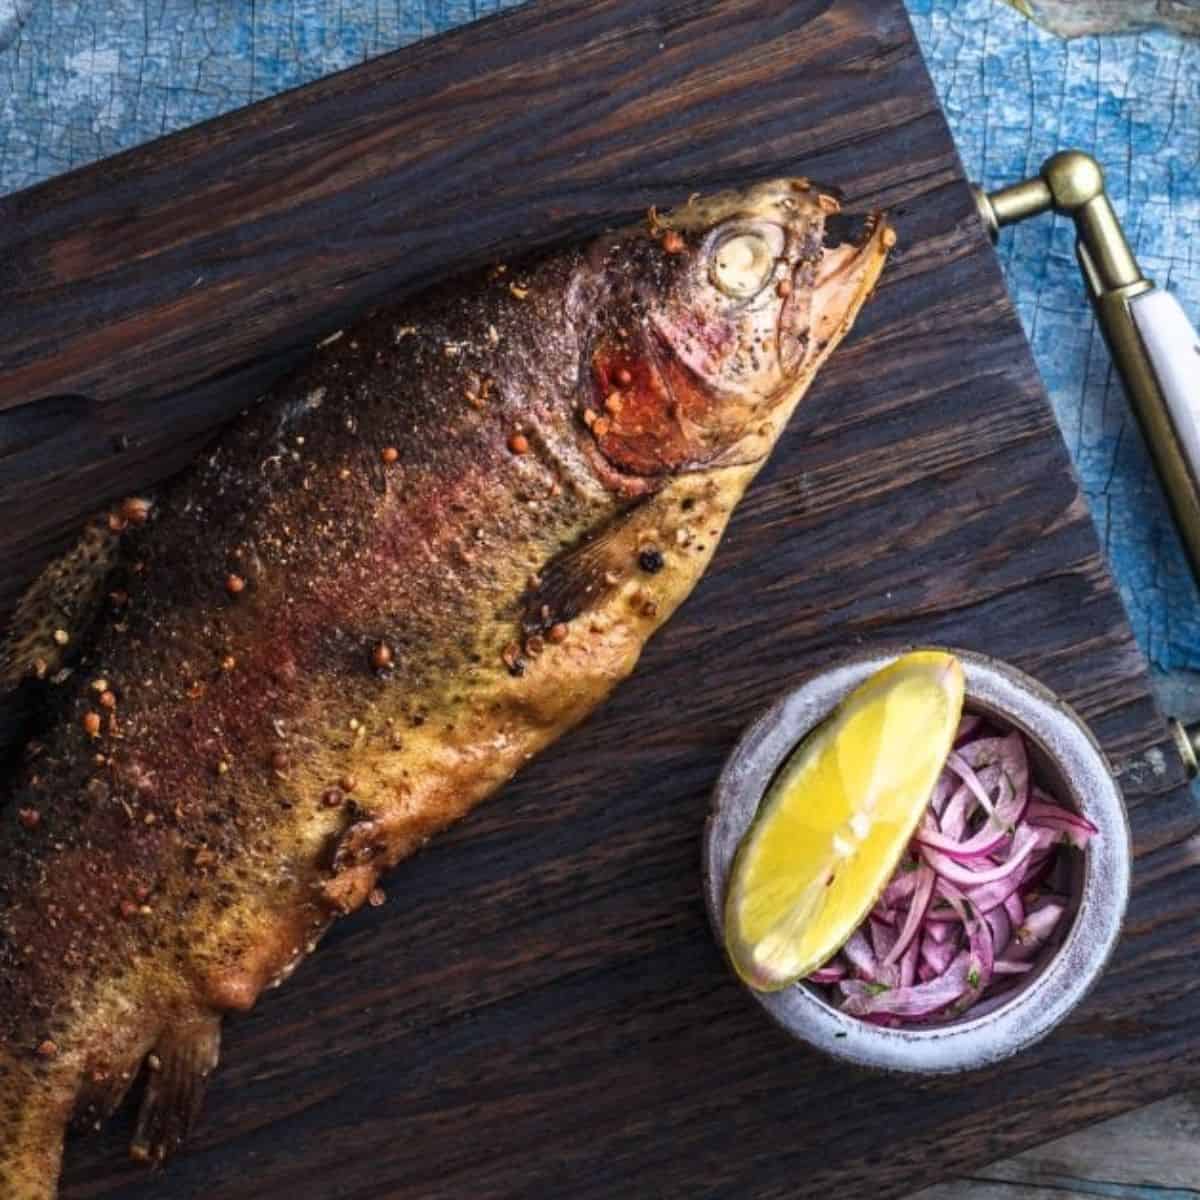 Whole smoked trout on a dark wood board with lemon wedge and red onion beside.